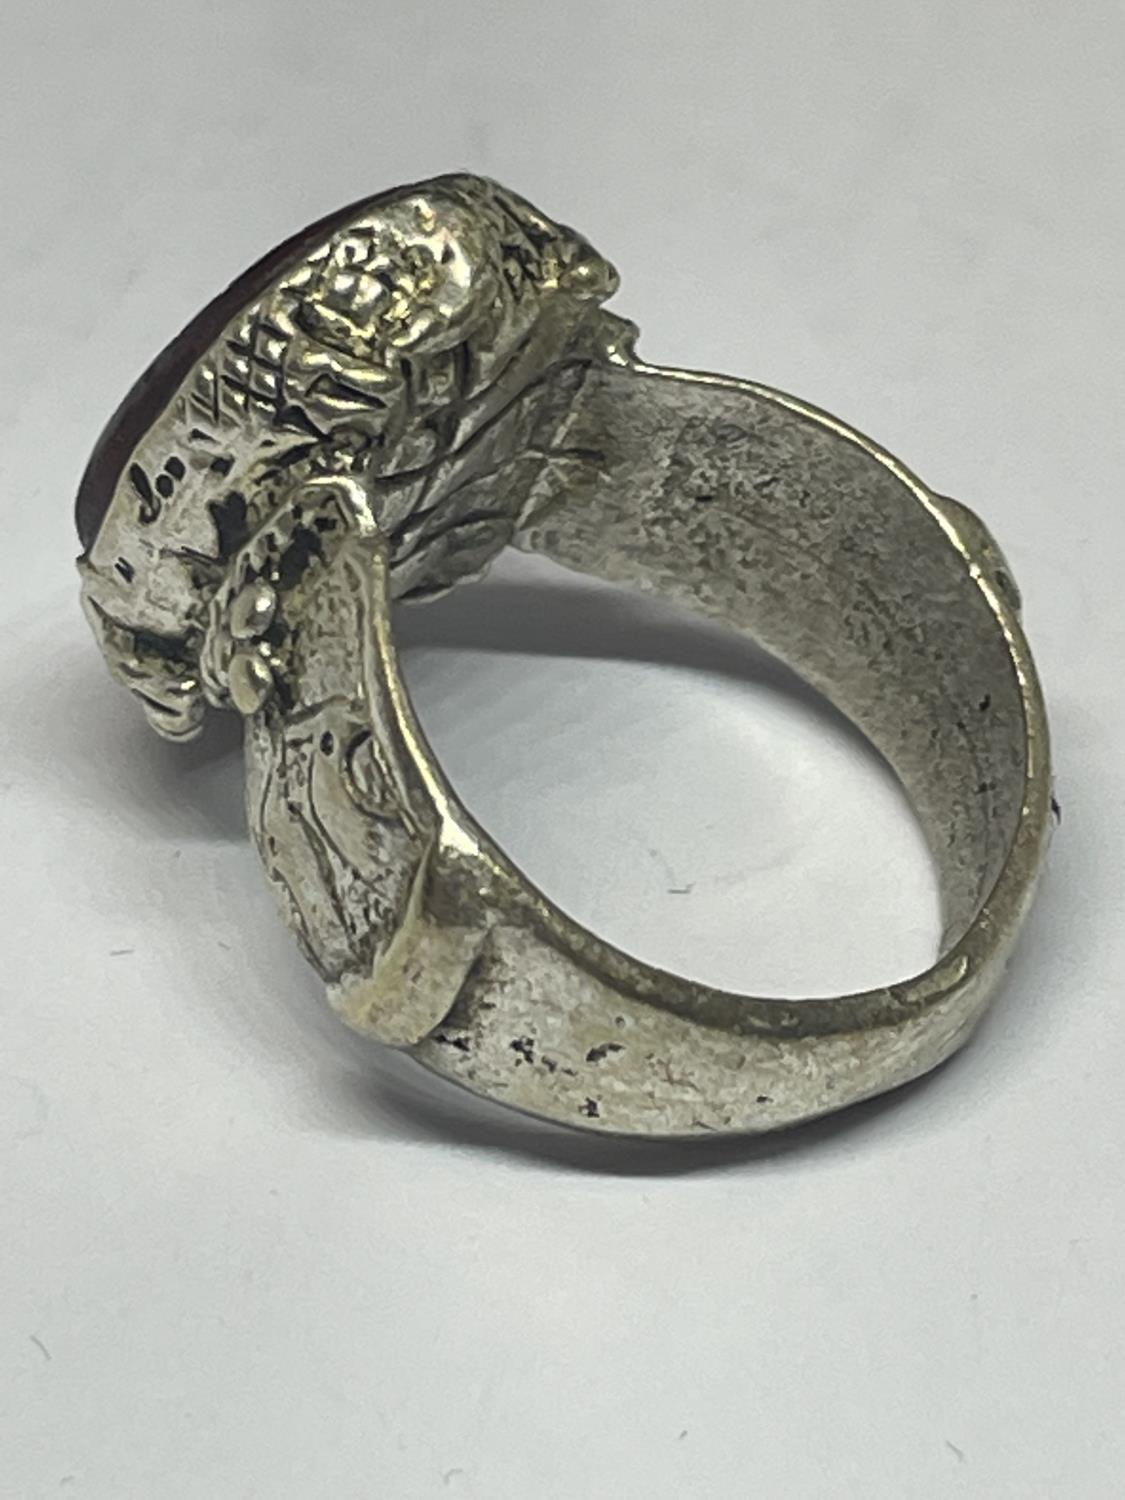 A MARKED SILVER RING WITH A TURTLE DESIGN SEAL INA PRESENTATION BOX - Image 4 of 5